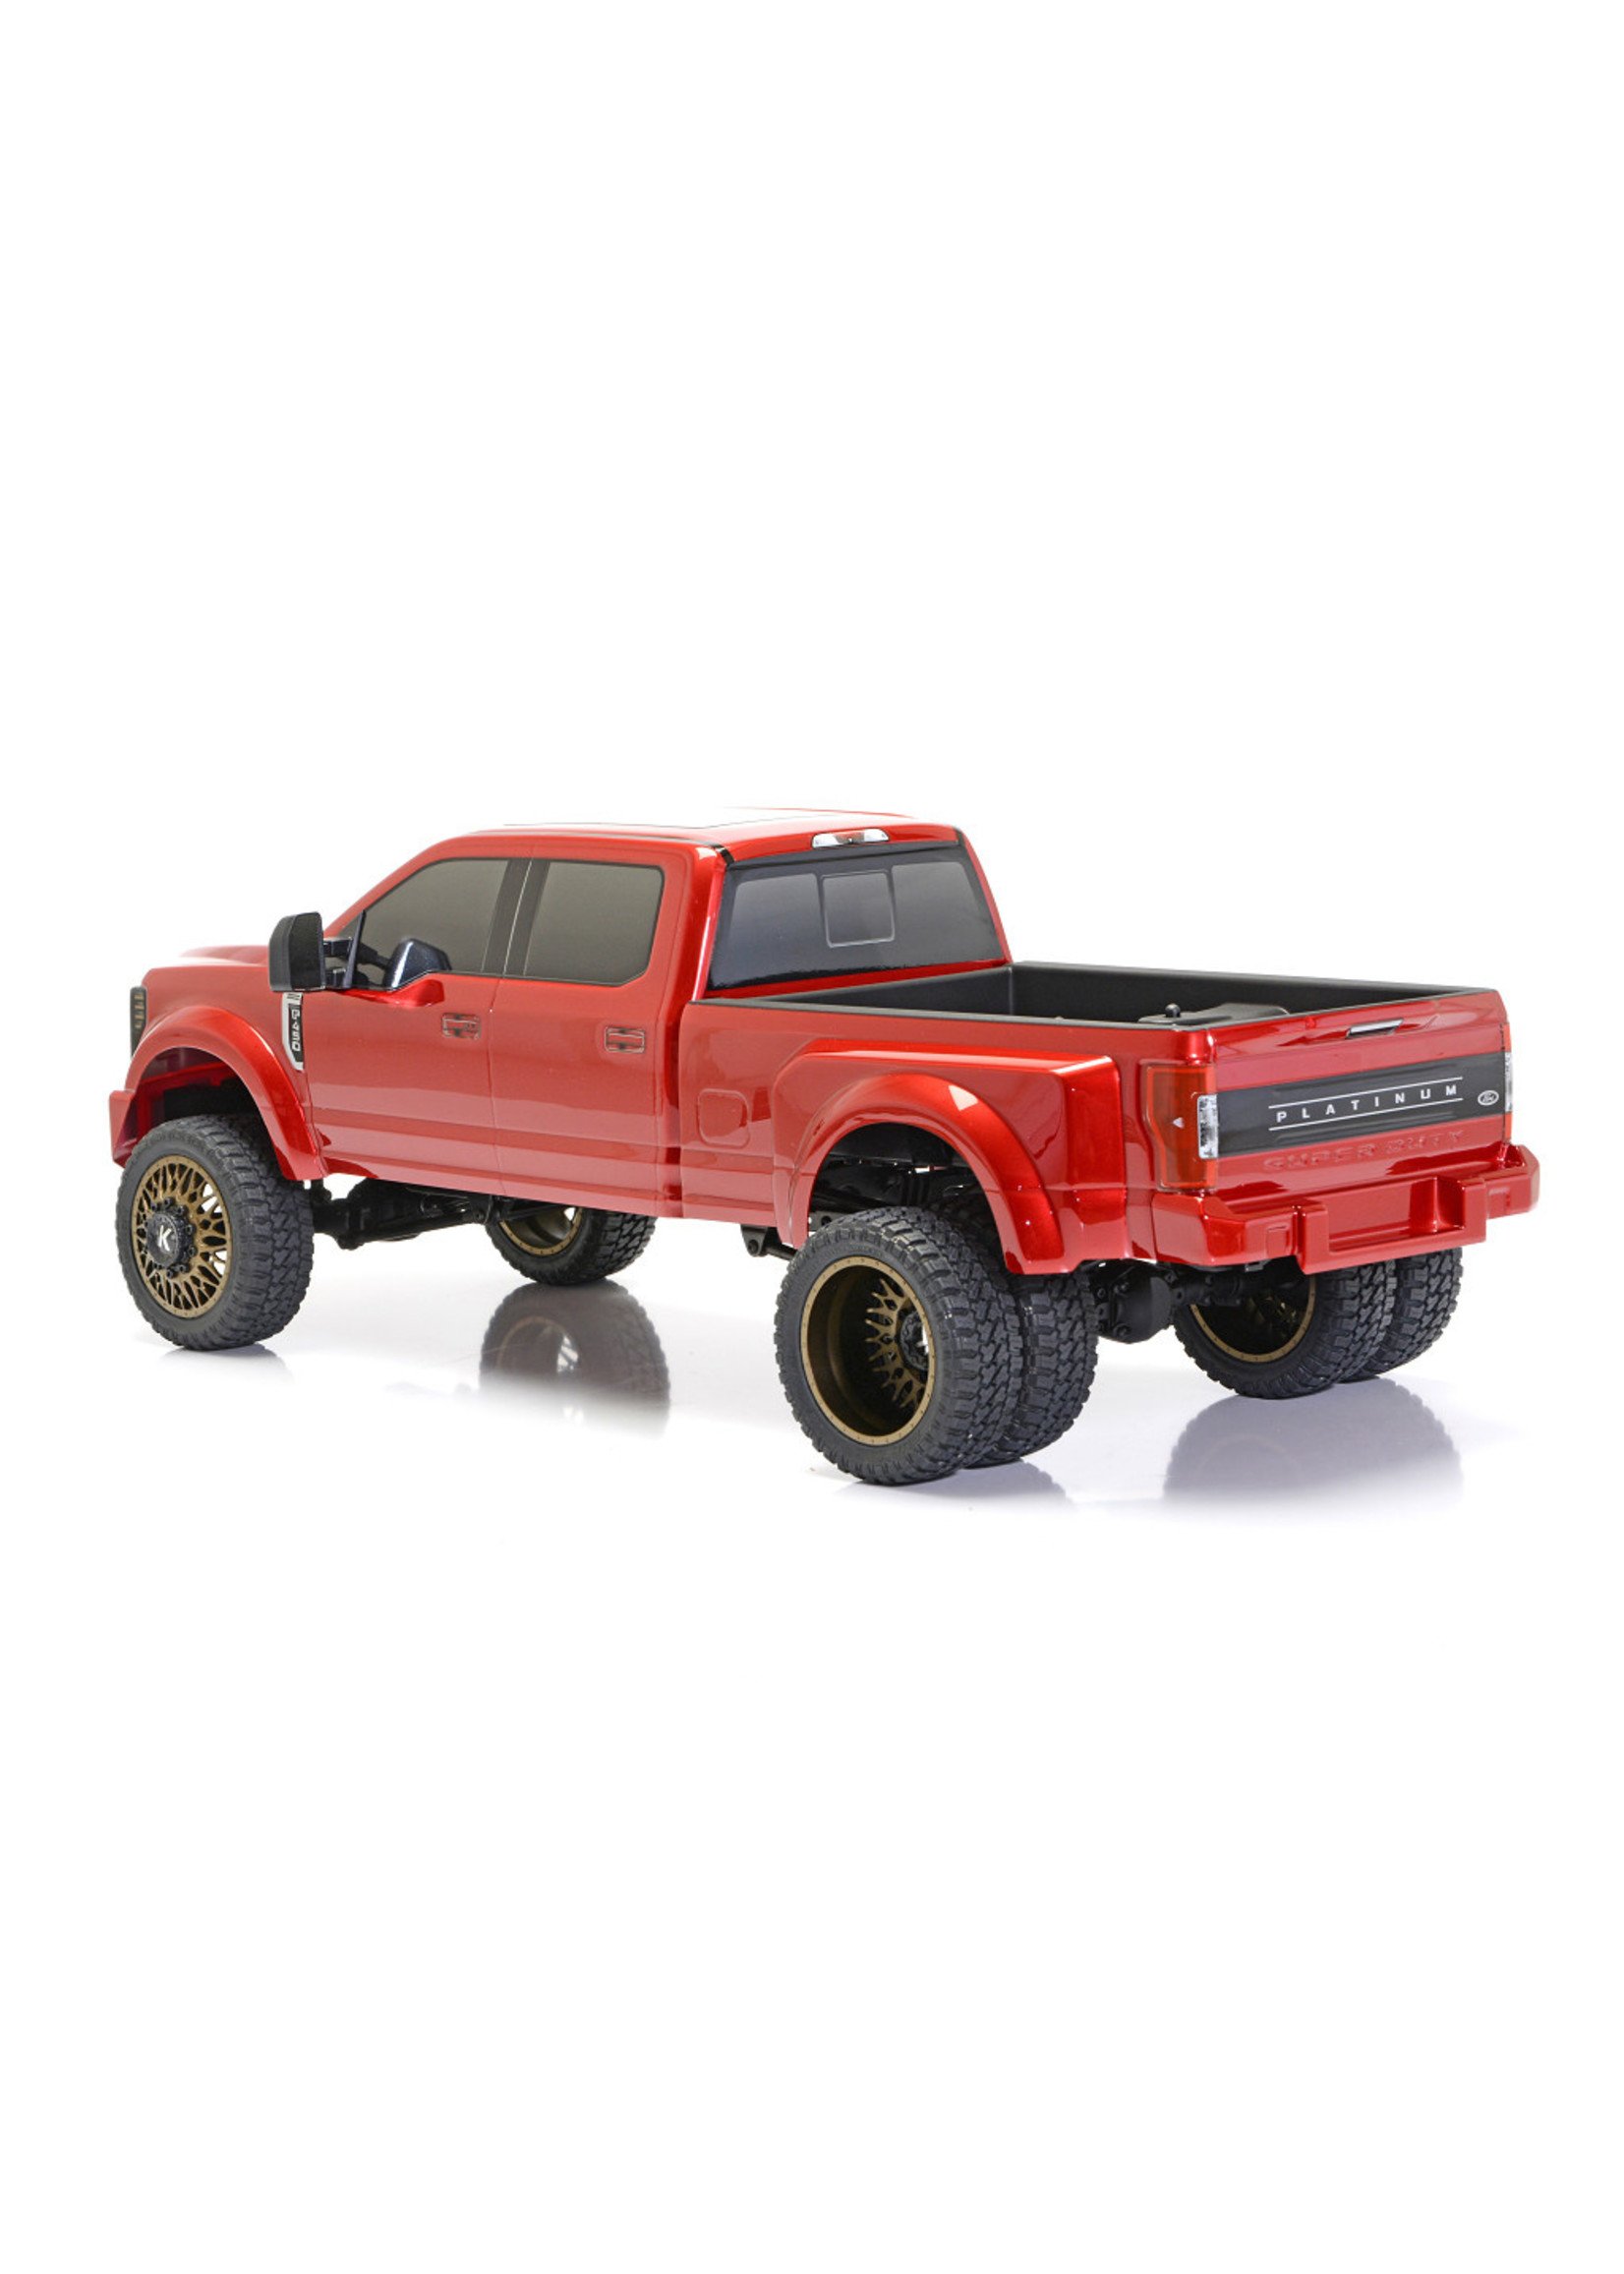 CEN Racing 1/10 Ford F450 4WD Solid Axle RTR Truck - Red Candy Apple